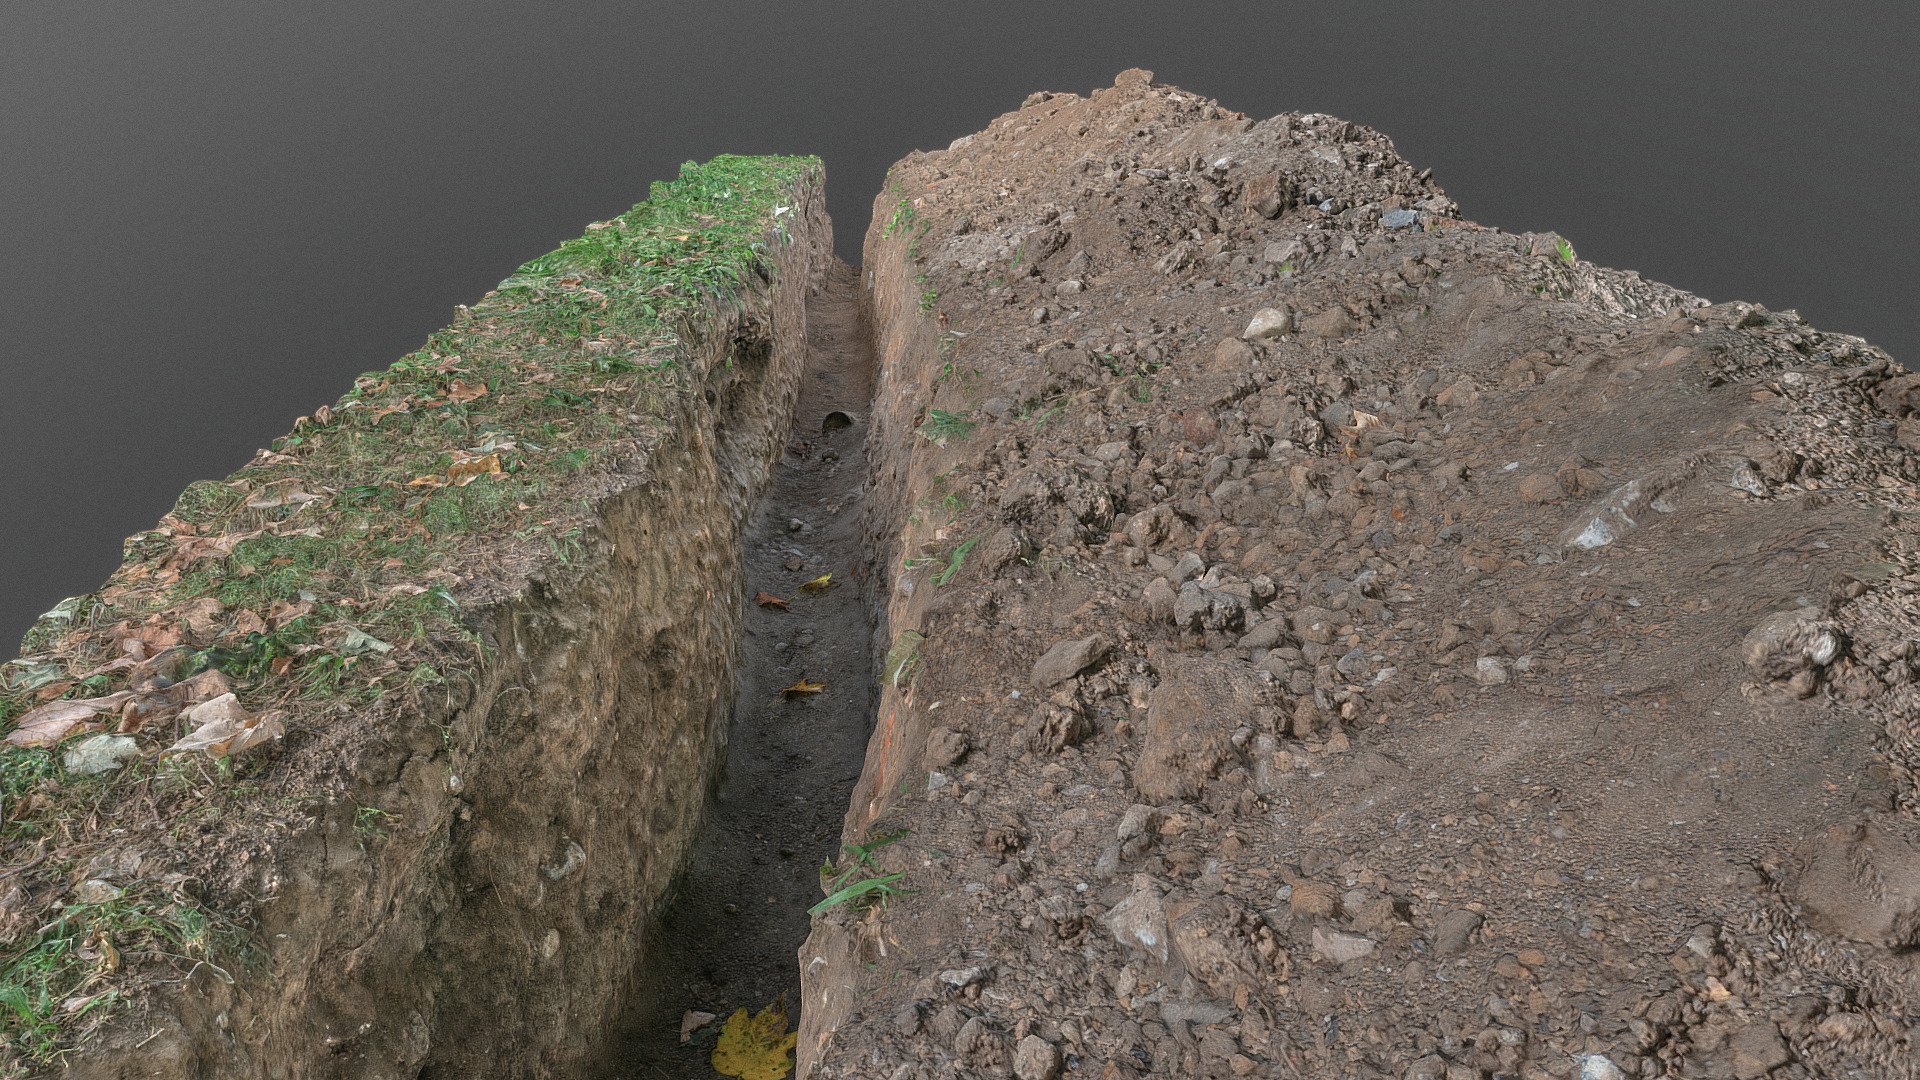 Construction dig site excavation building ground earth work, dug-out trench ditch, probably for Cable broadband fiber repair works dig technical site inspection

Photogrammetry scan 210 x 24MP, 3x16K textures + HD normals - Construction site dug-out cable trench ditch - Buy Royalty Free 3D model by matousekfoto 3d model